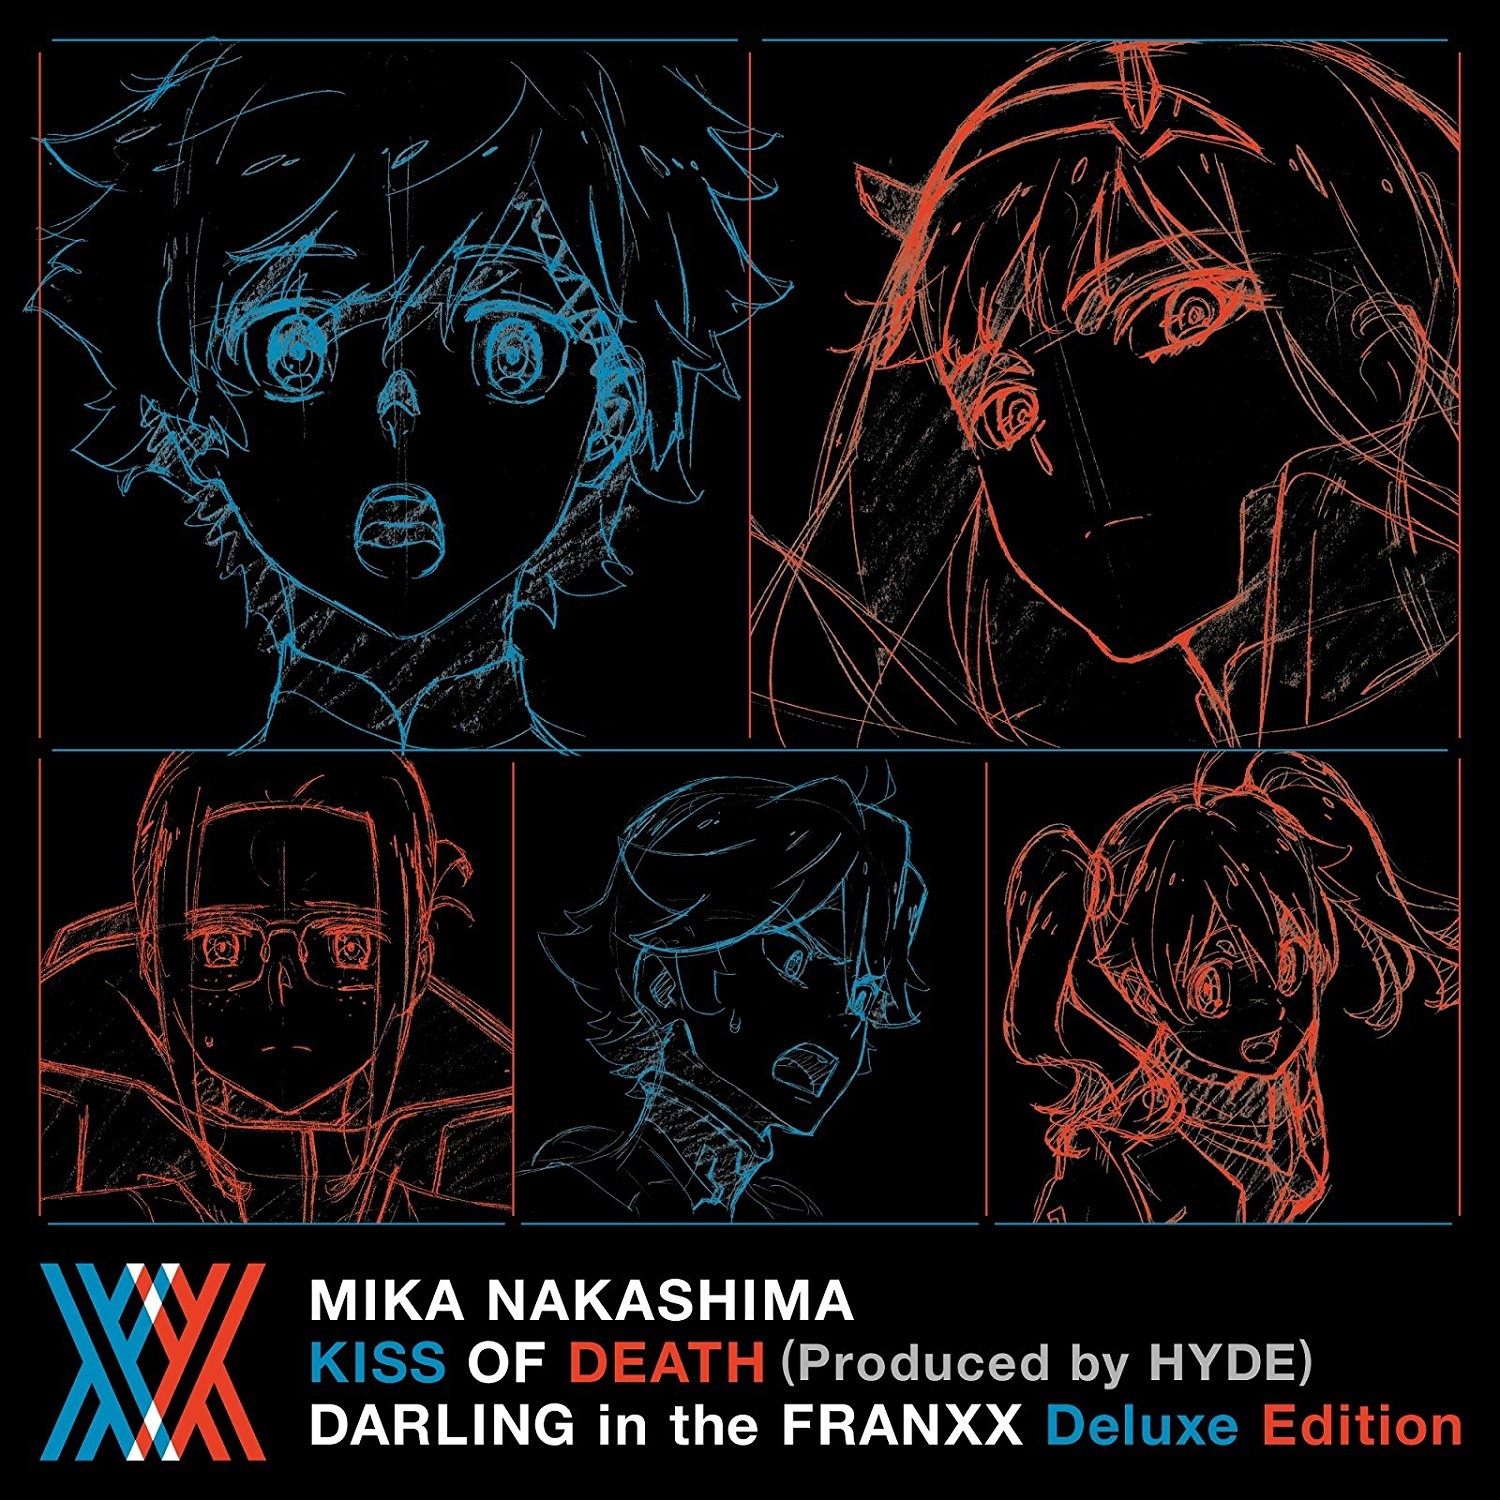 KISS OF DEATH(Produced by HYDE) (Deluxe Edition)